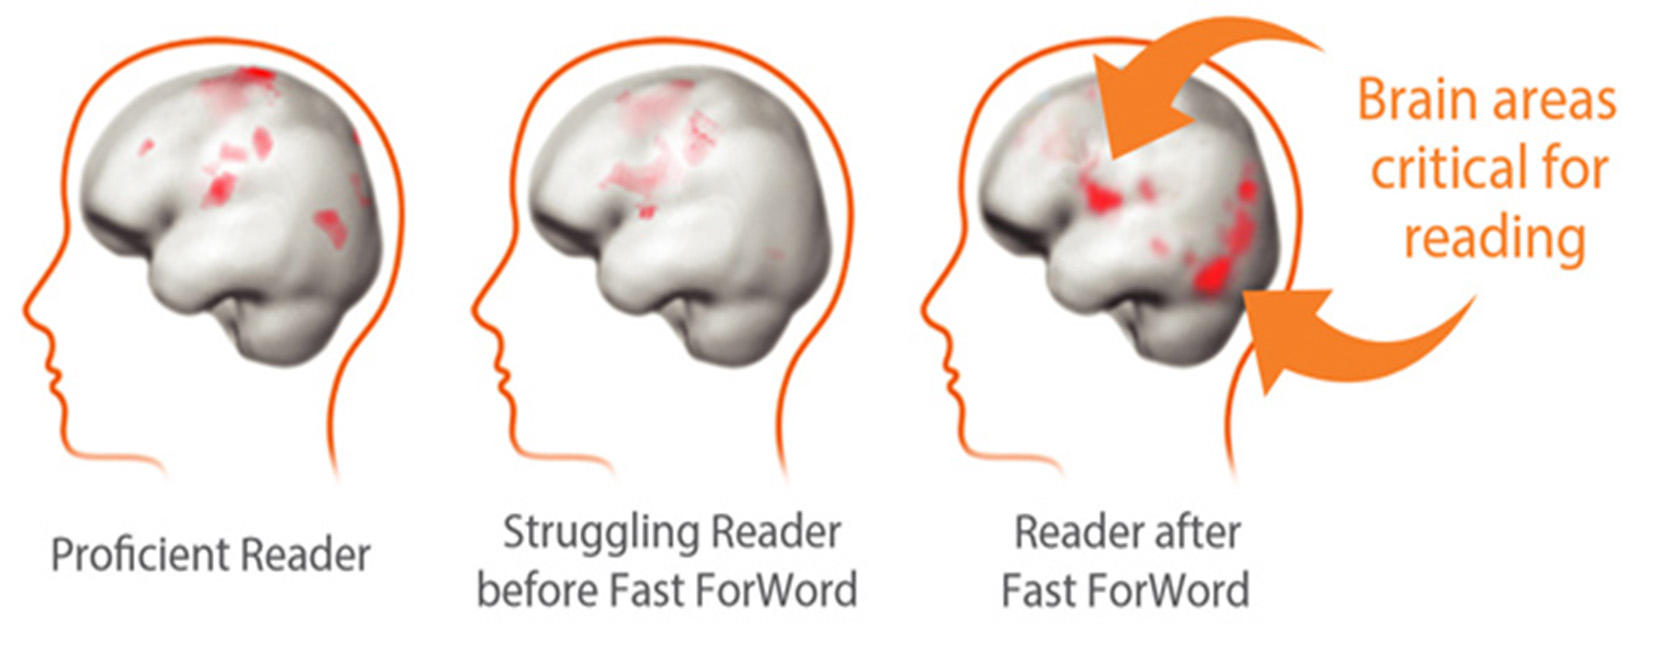 Fast-ForWord-improves-brain-areas-critical-for-reading